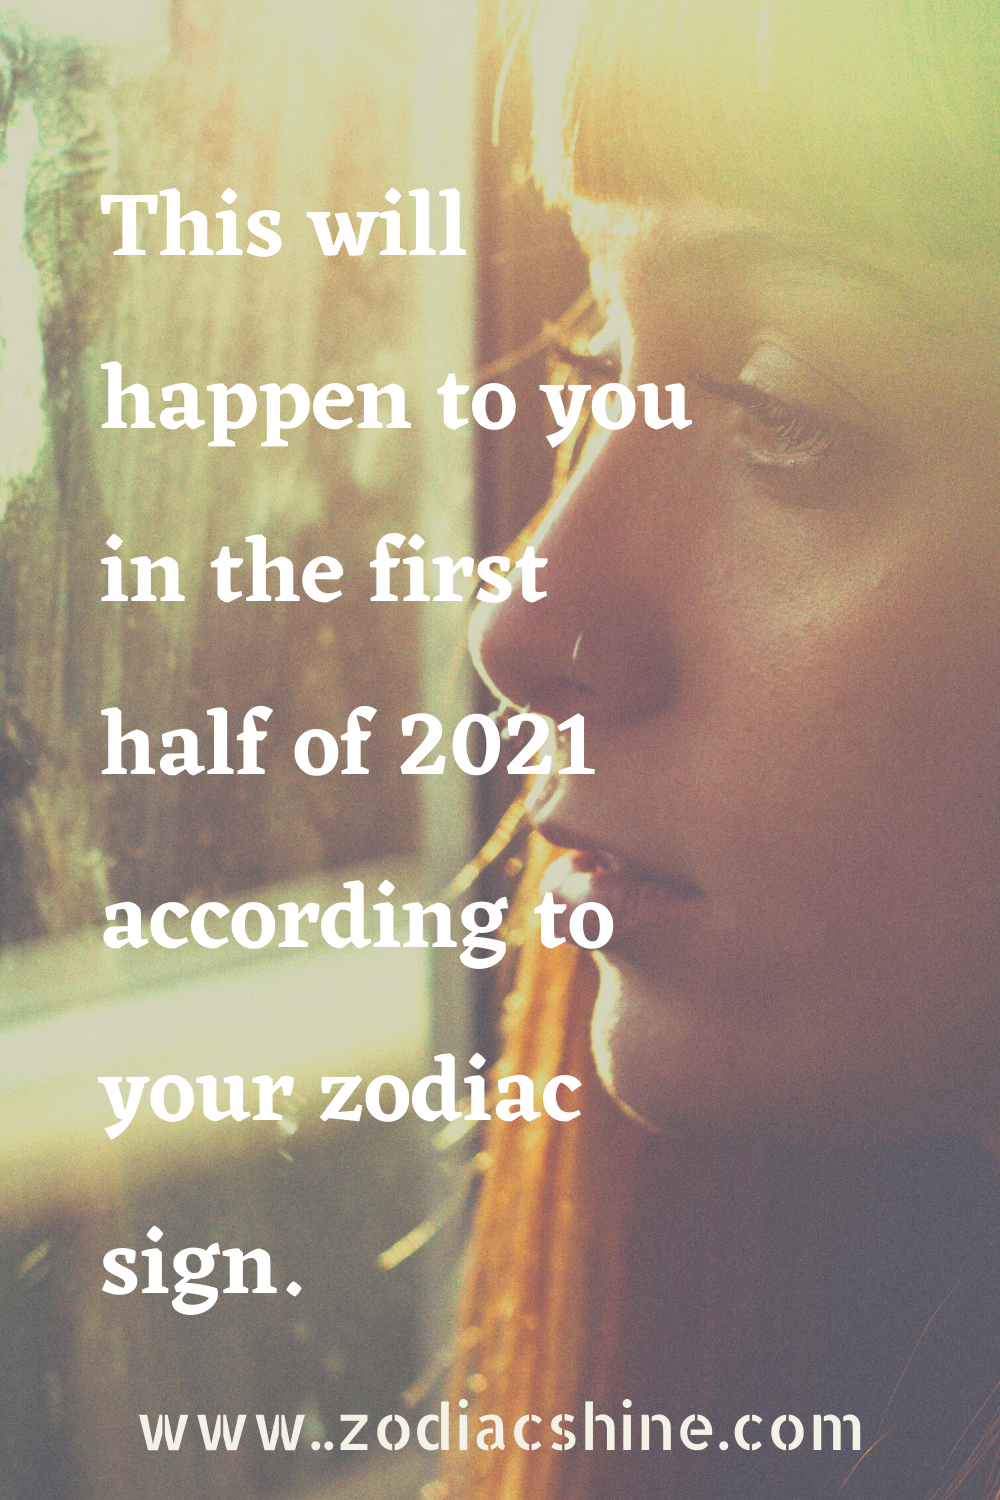 This will happen to you in the first half of 2021 according to your zodiac sign.